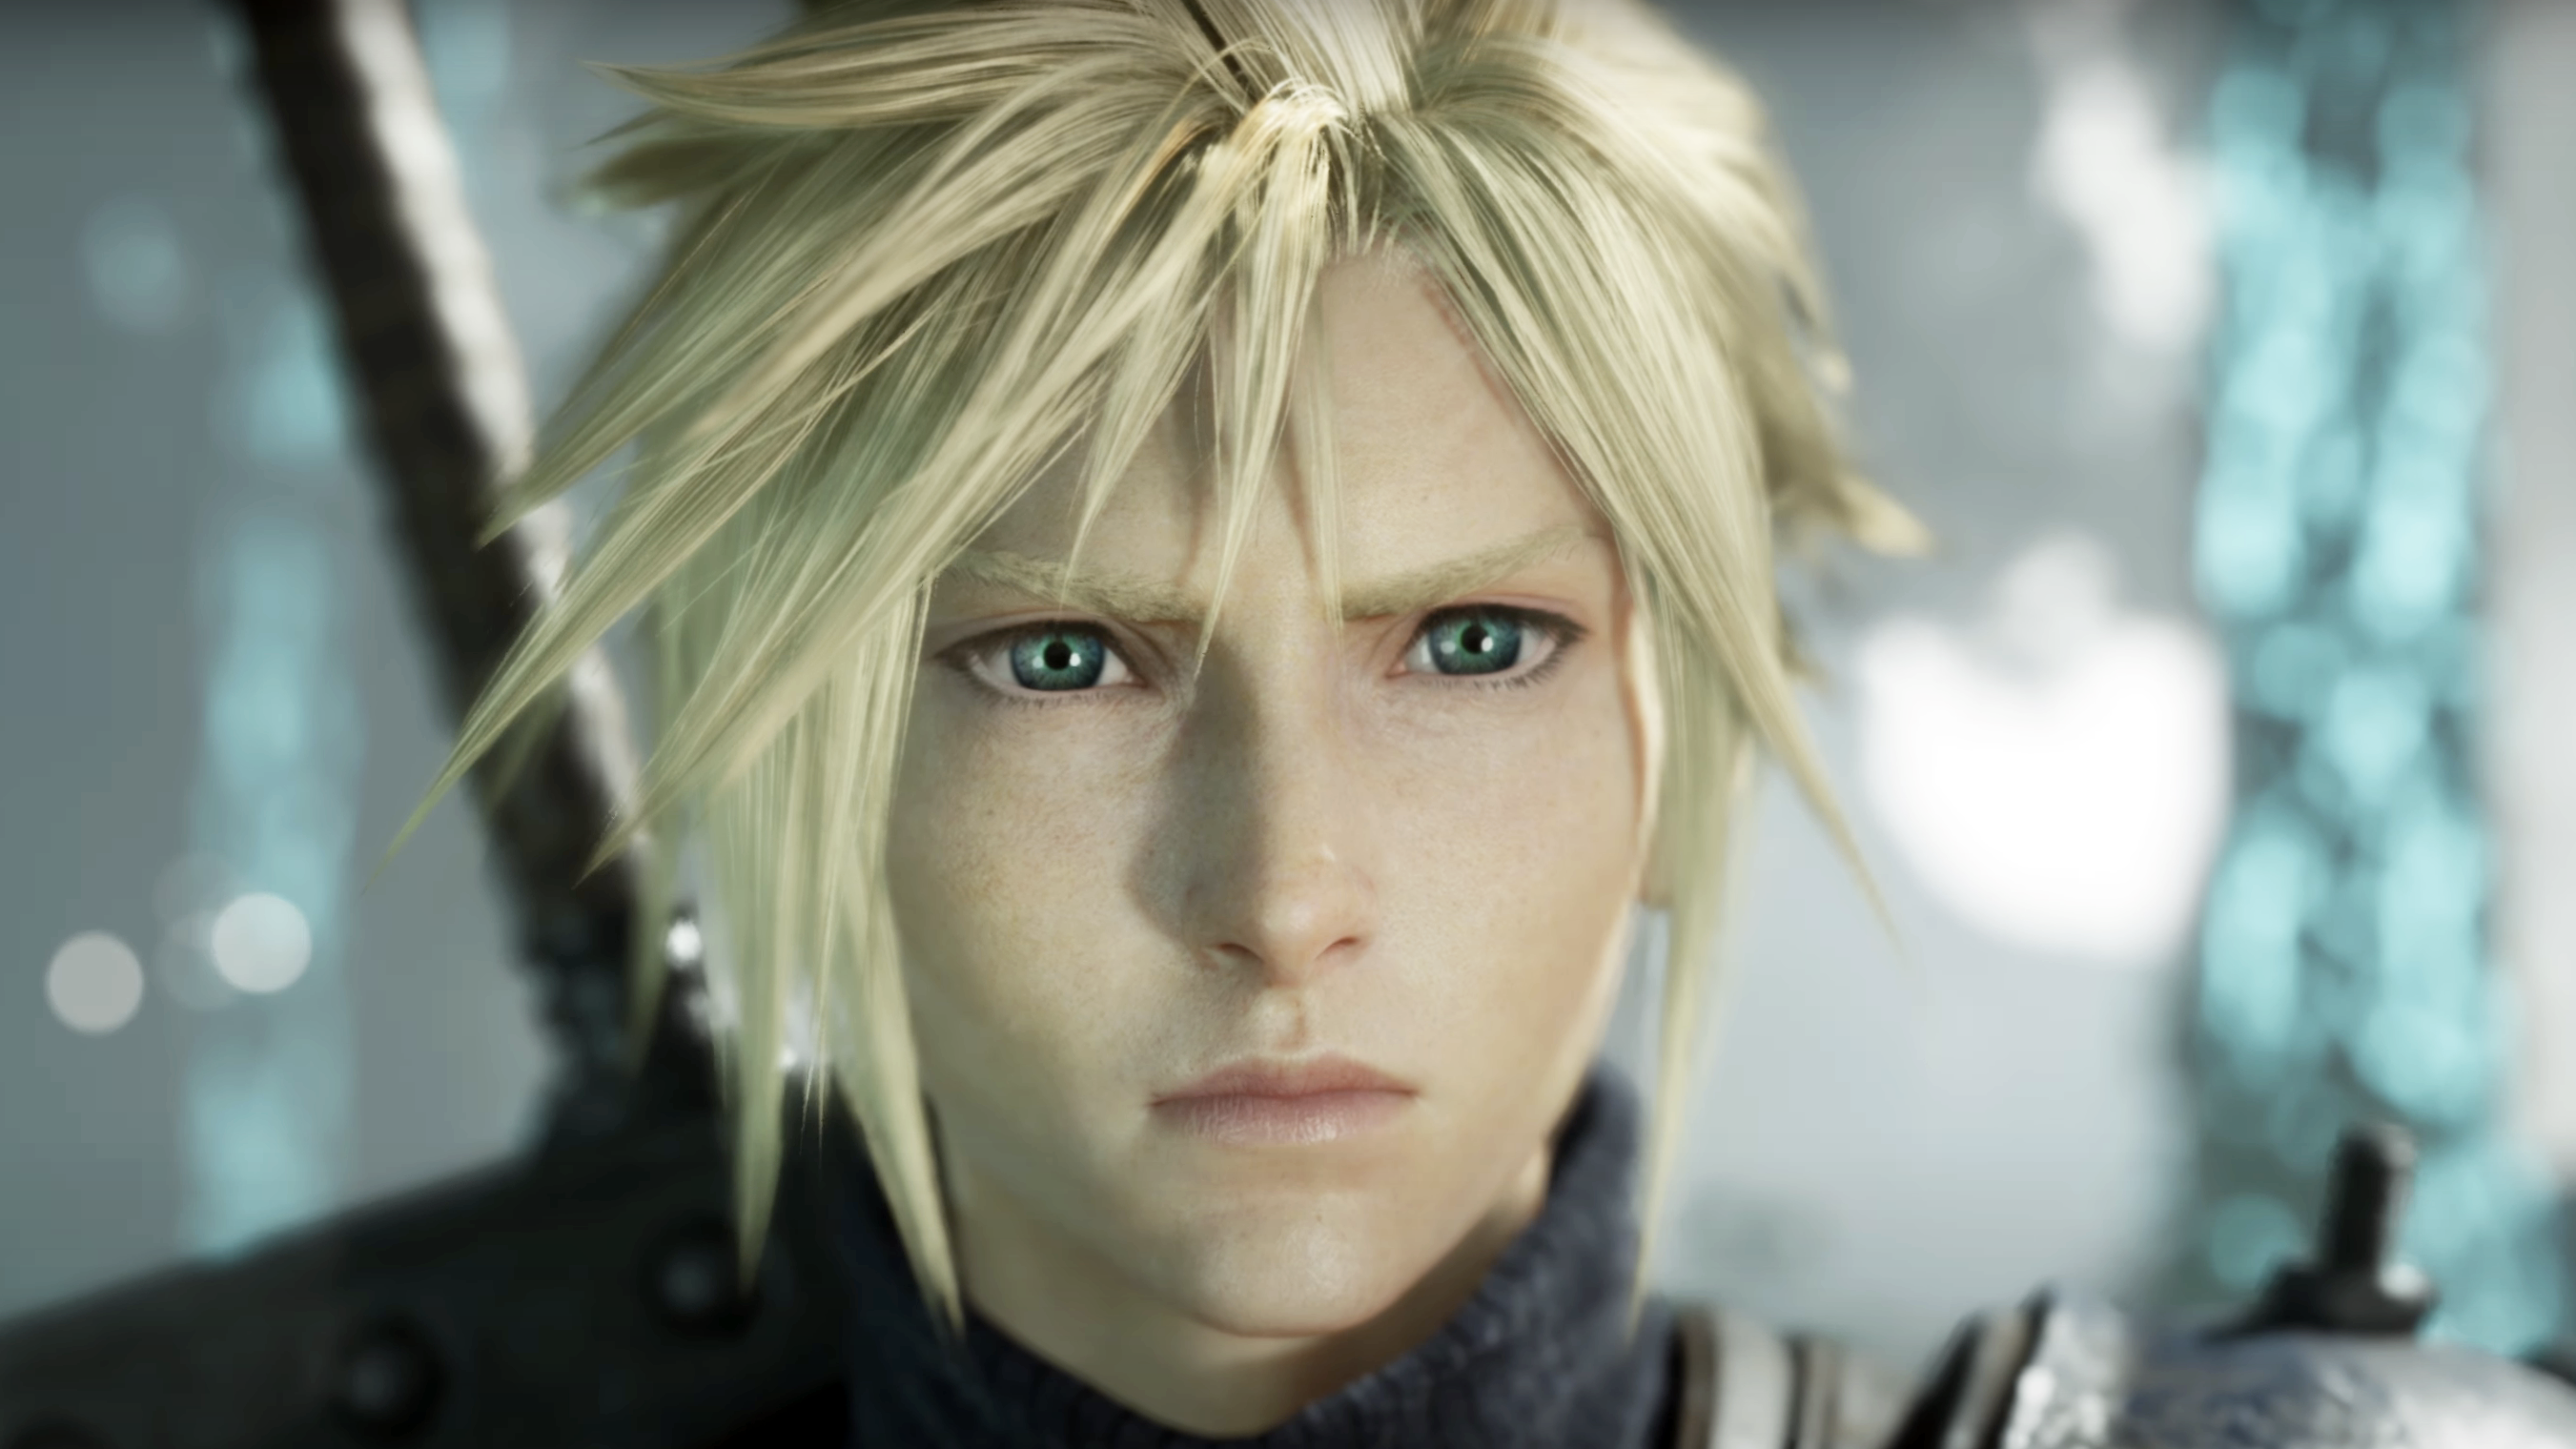 Final Fantasy 7 Rebirth hero Cloud shown staring at screen with giant sword